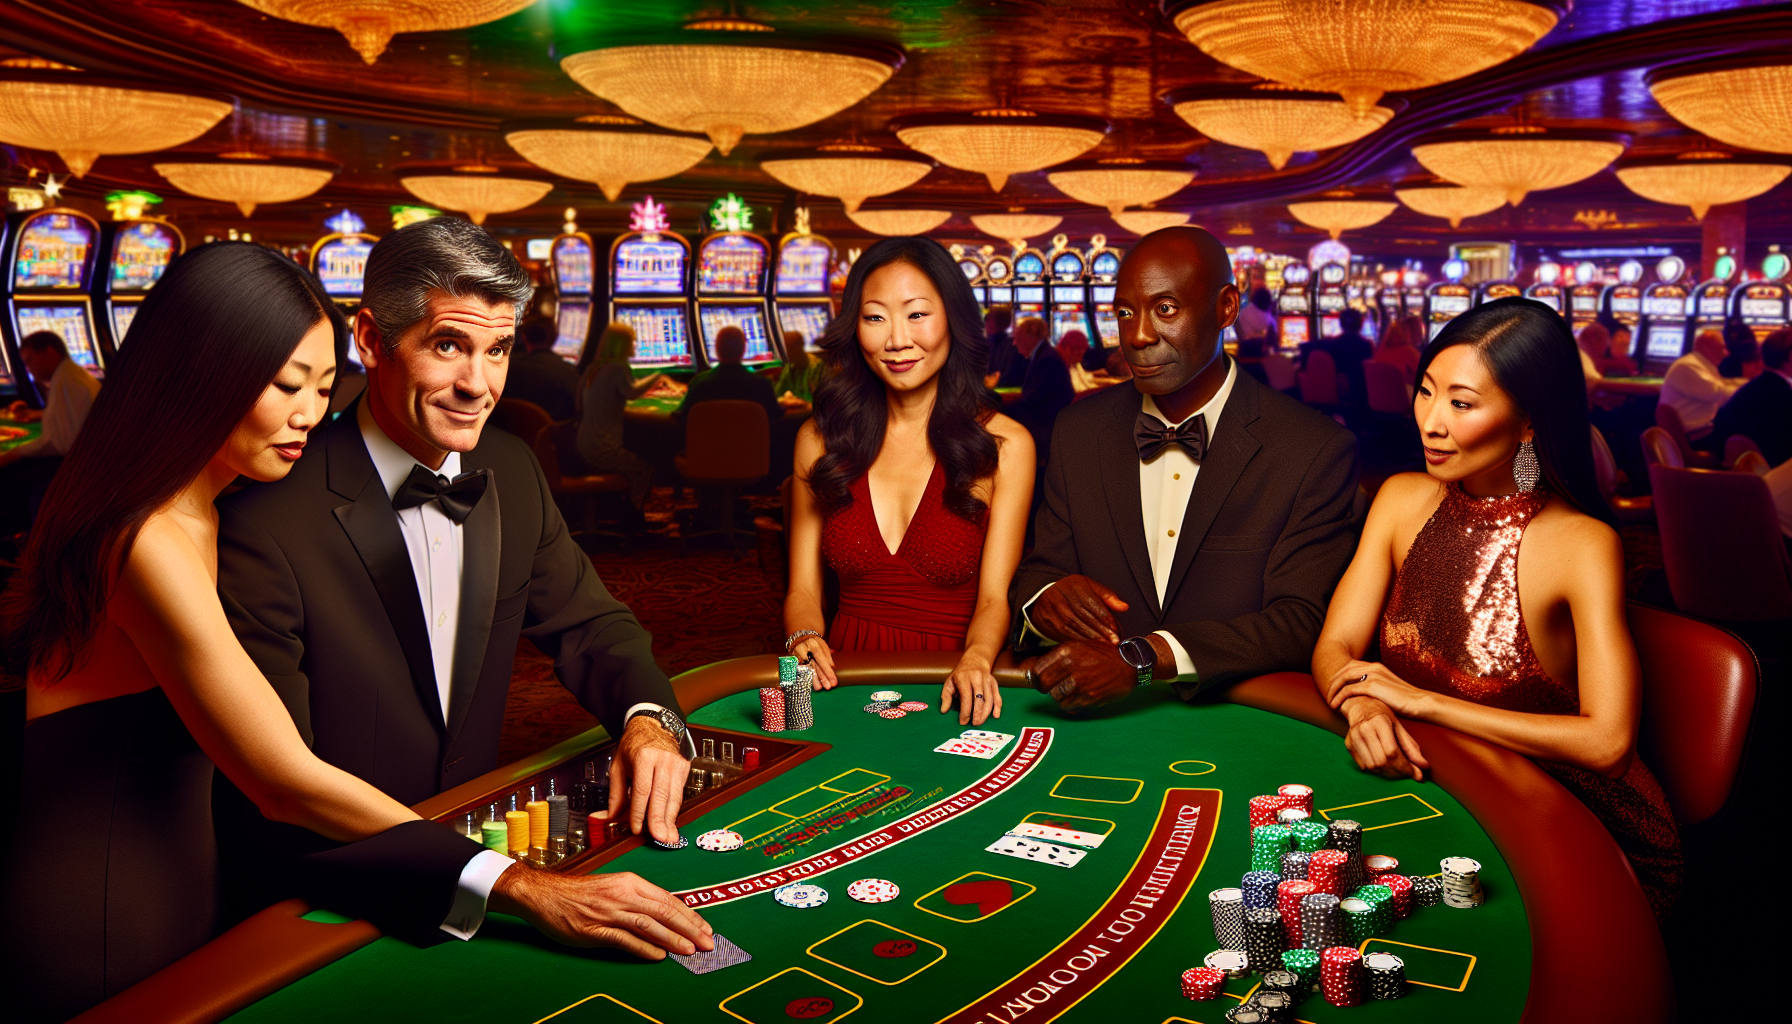 Leading Casino for Table Games - Image of people playing blackjack at a casino